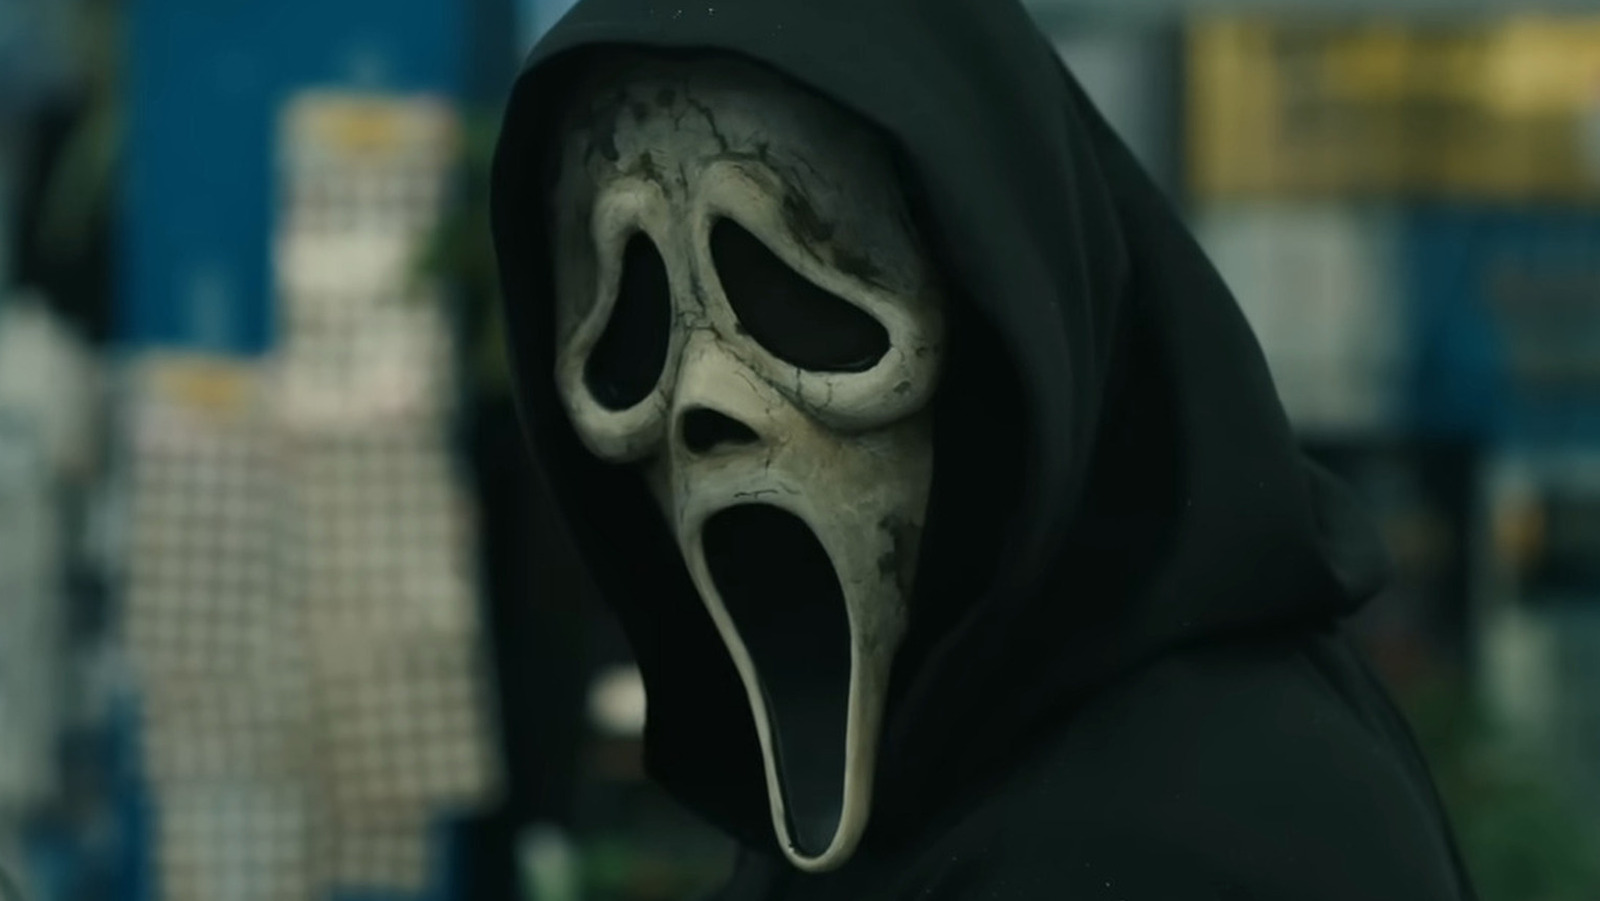 Scream 6' review: Ghostface chases Jenna Ortega, new cast in NYC